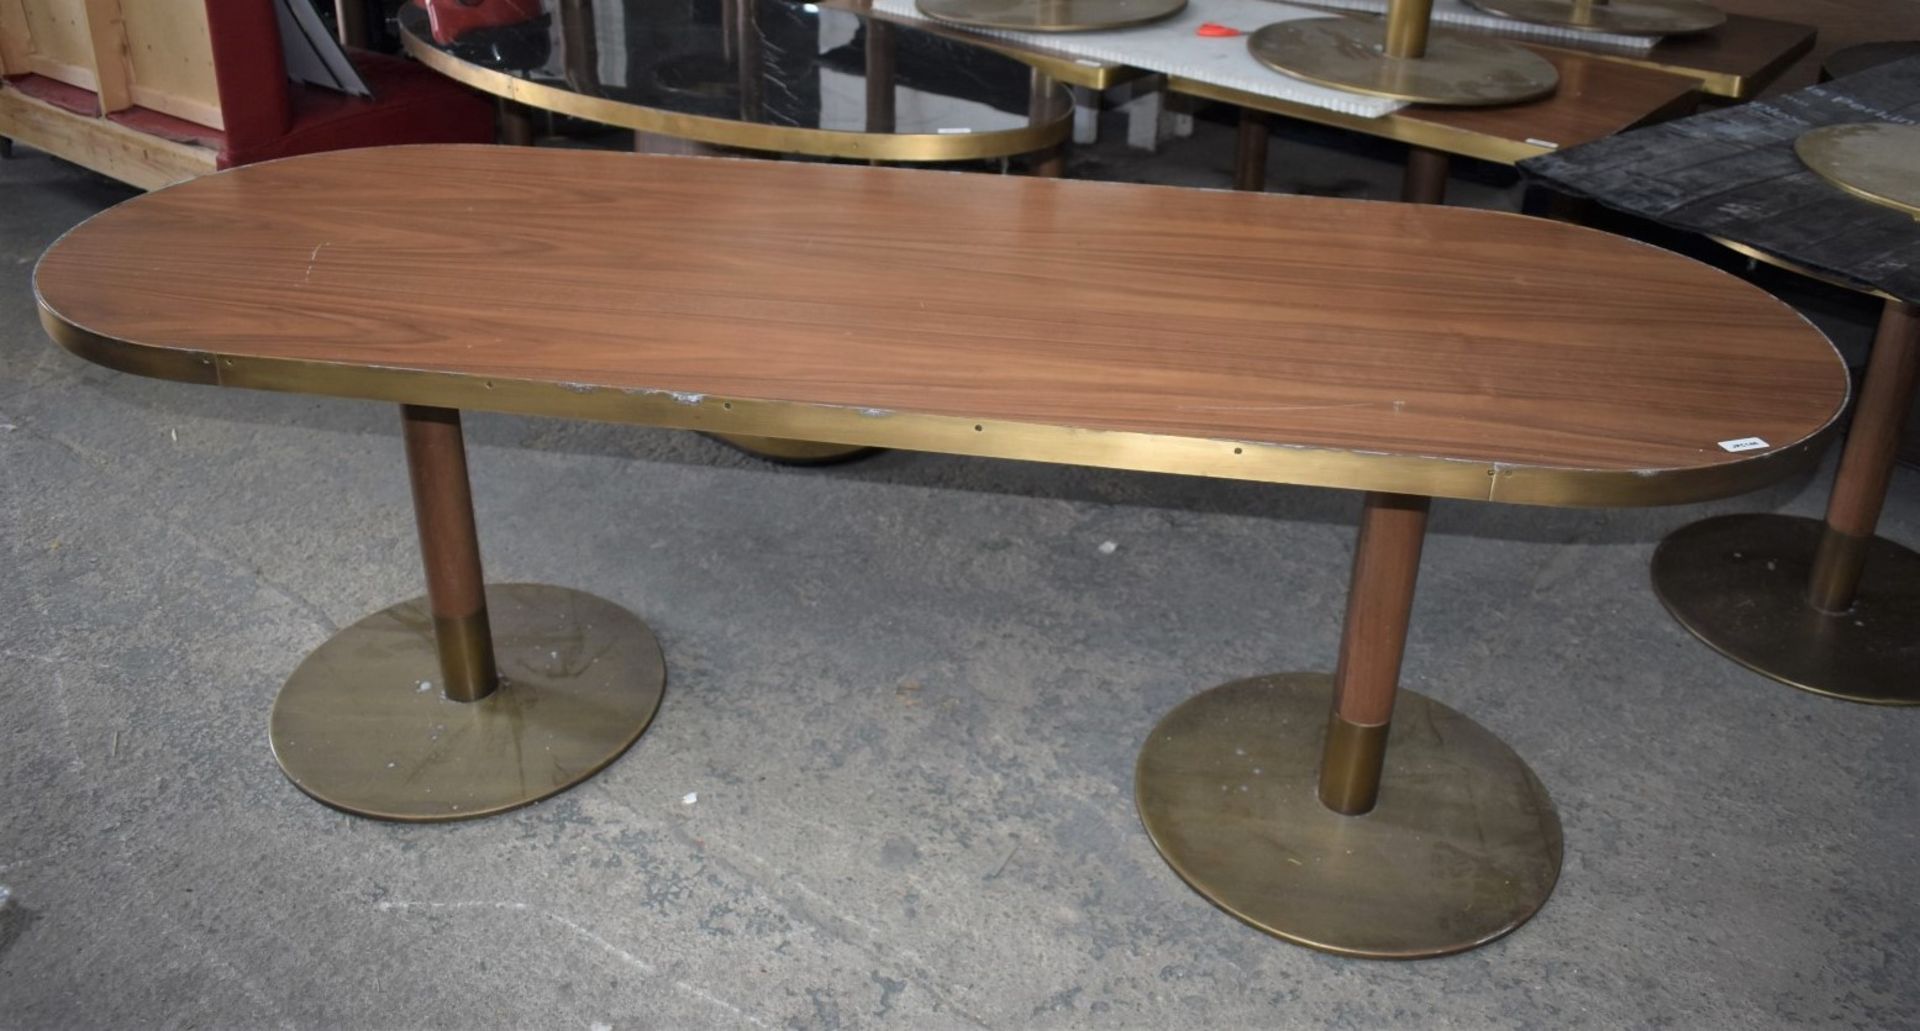 1 x Oval Banqueting Dining Table By AKP Design Athens - Walnut Top With Antique Brass Edging - Image 8 of 16